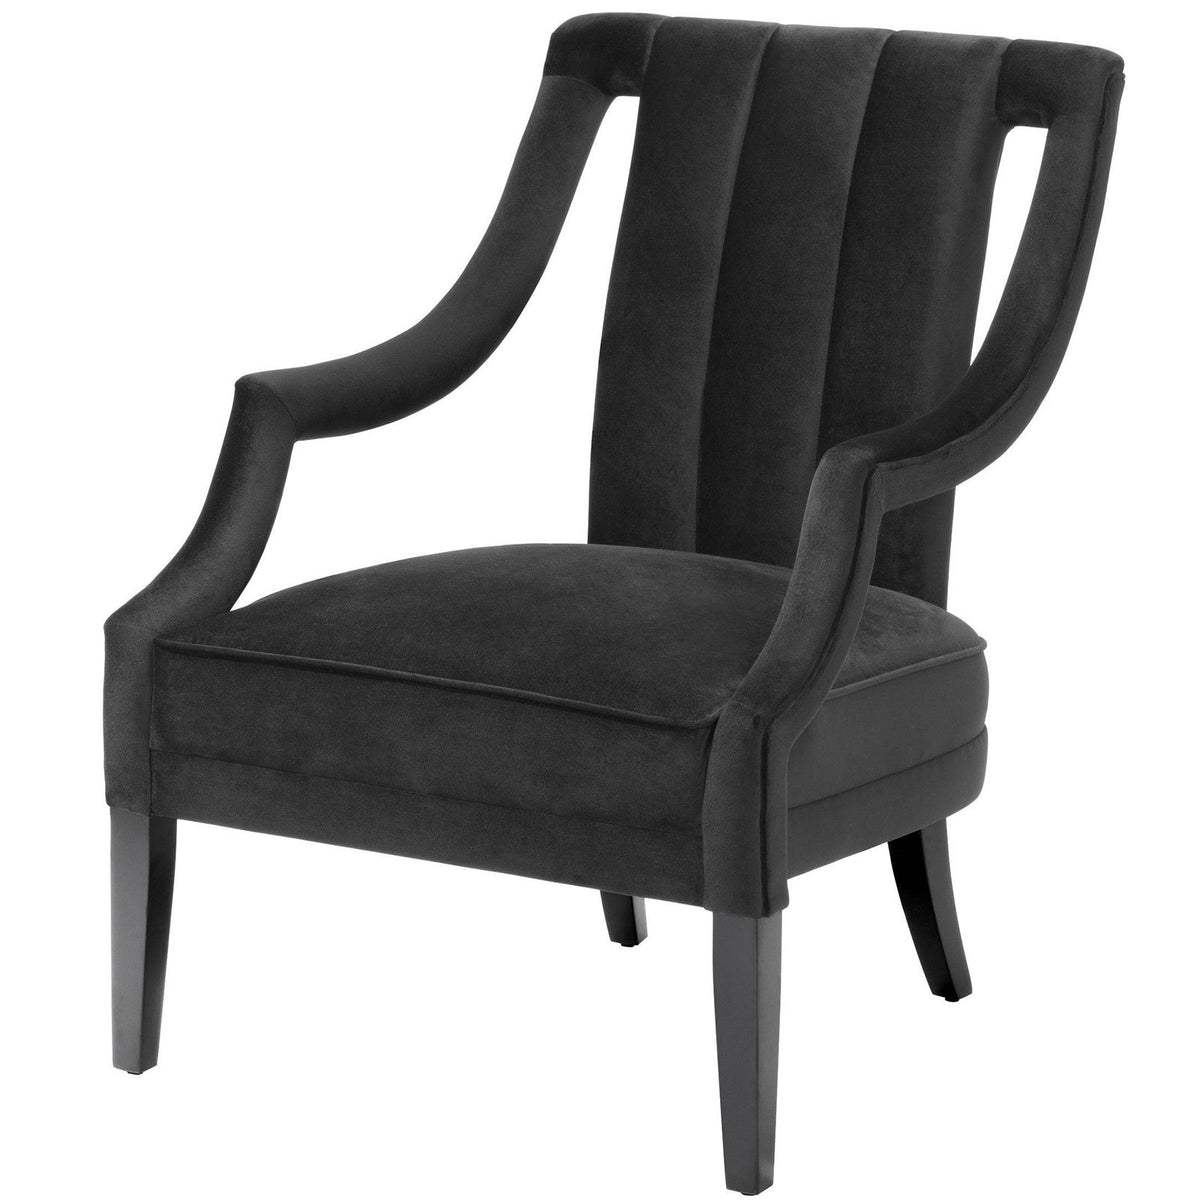 Ermitage Chair